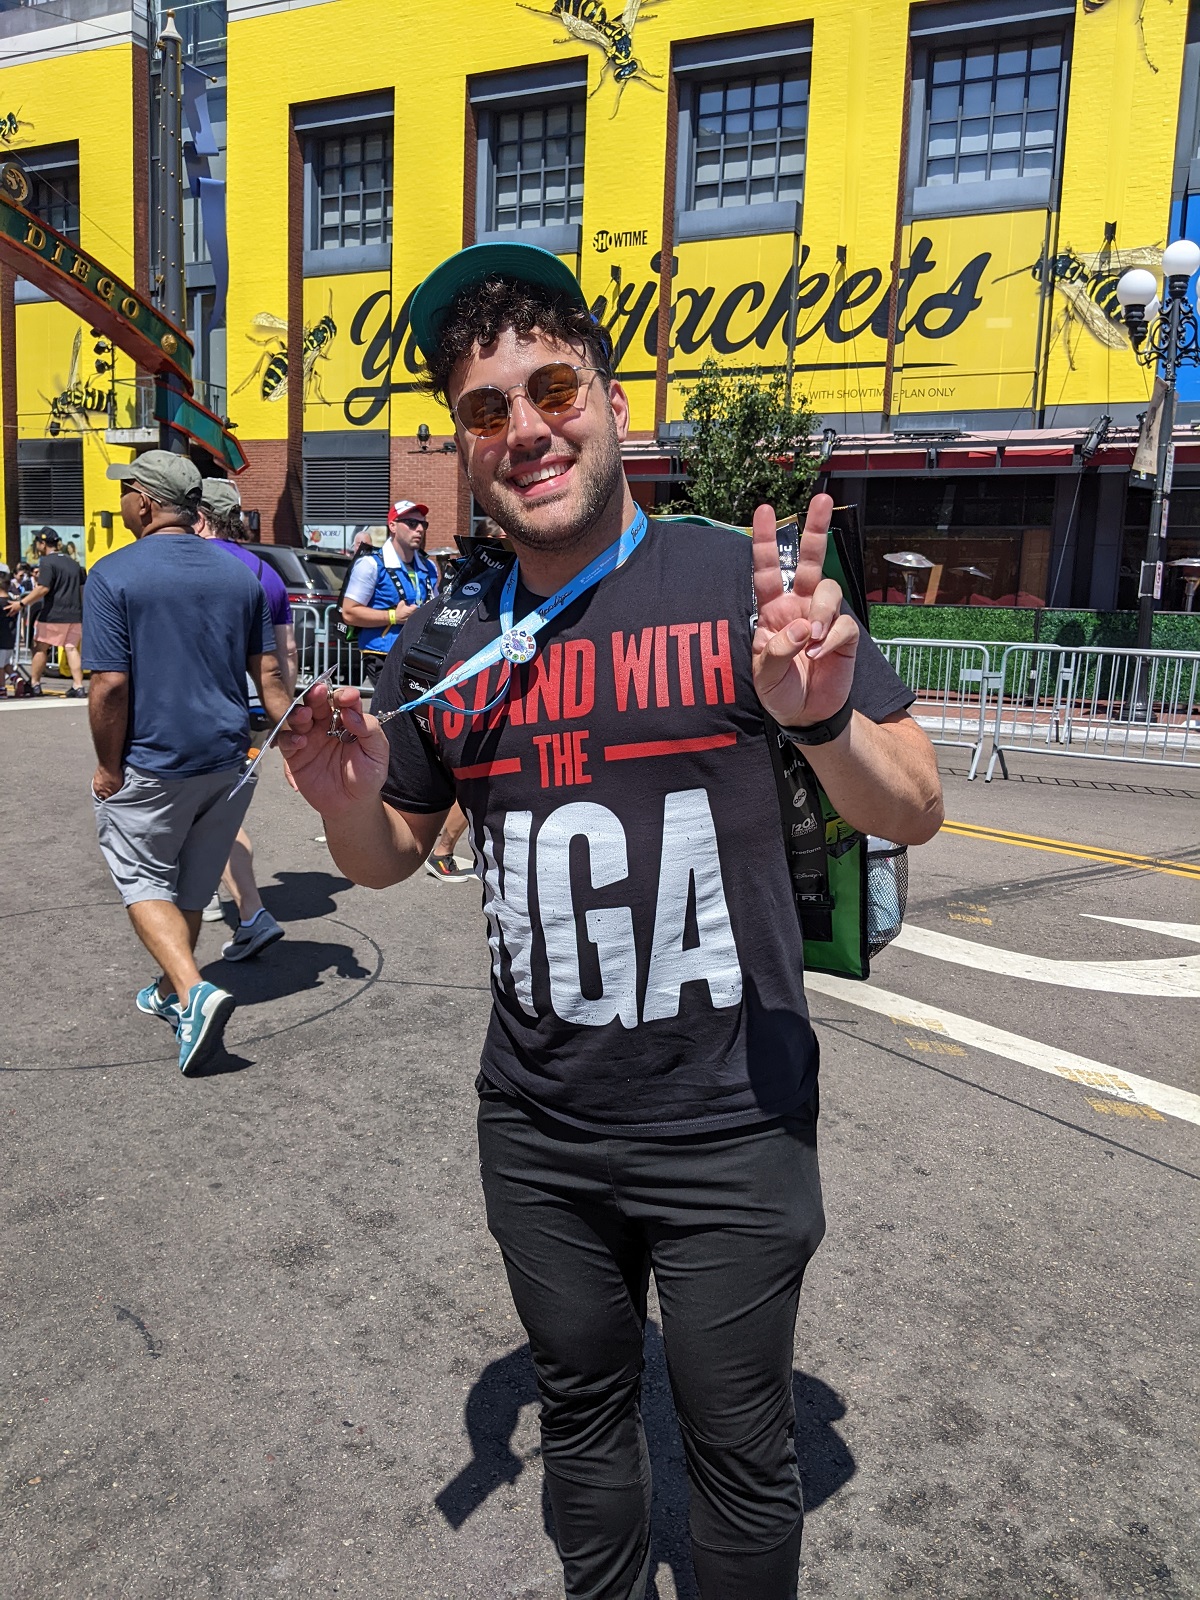 Image of a young, white man with dark curly hair wearing a baseball cap, sunglasses, a black t-shirt that reads "I STAND WITH THE WGA" and black pants. He's flashing a peace sign and smiling. 